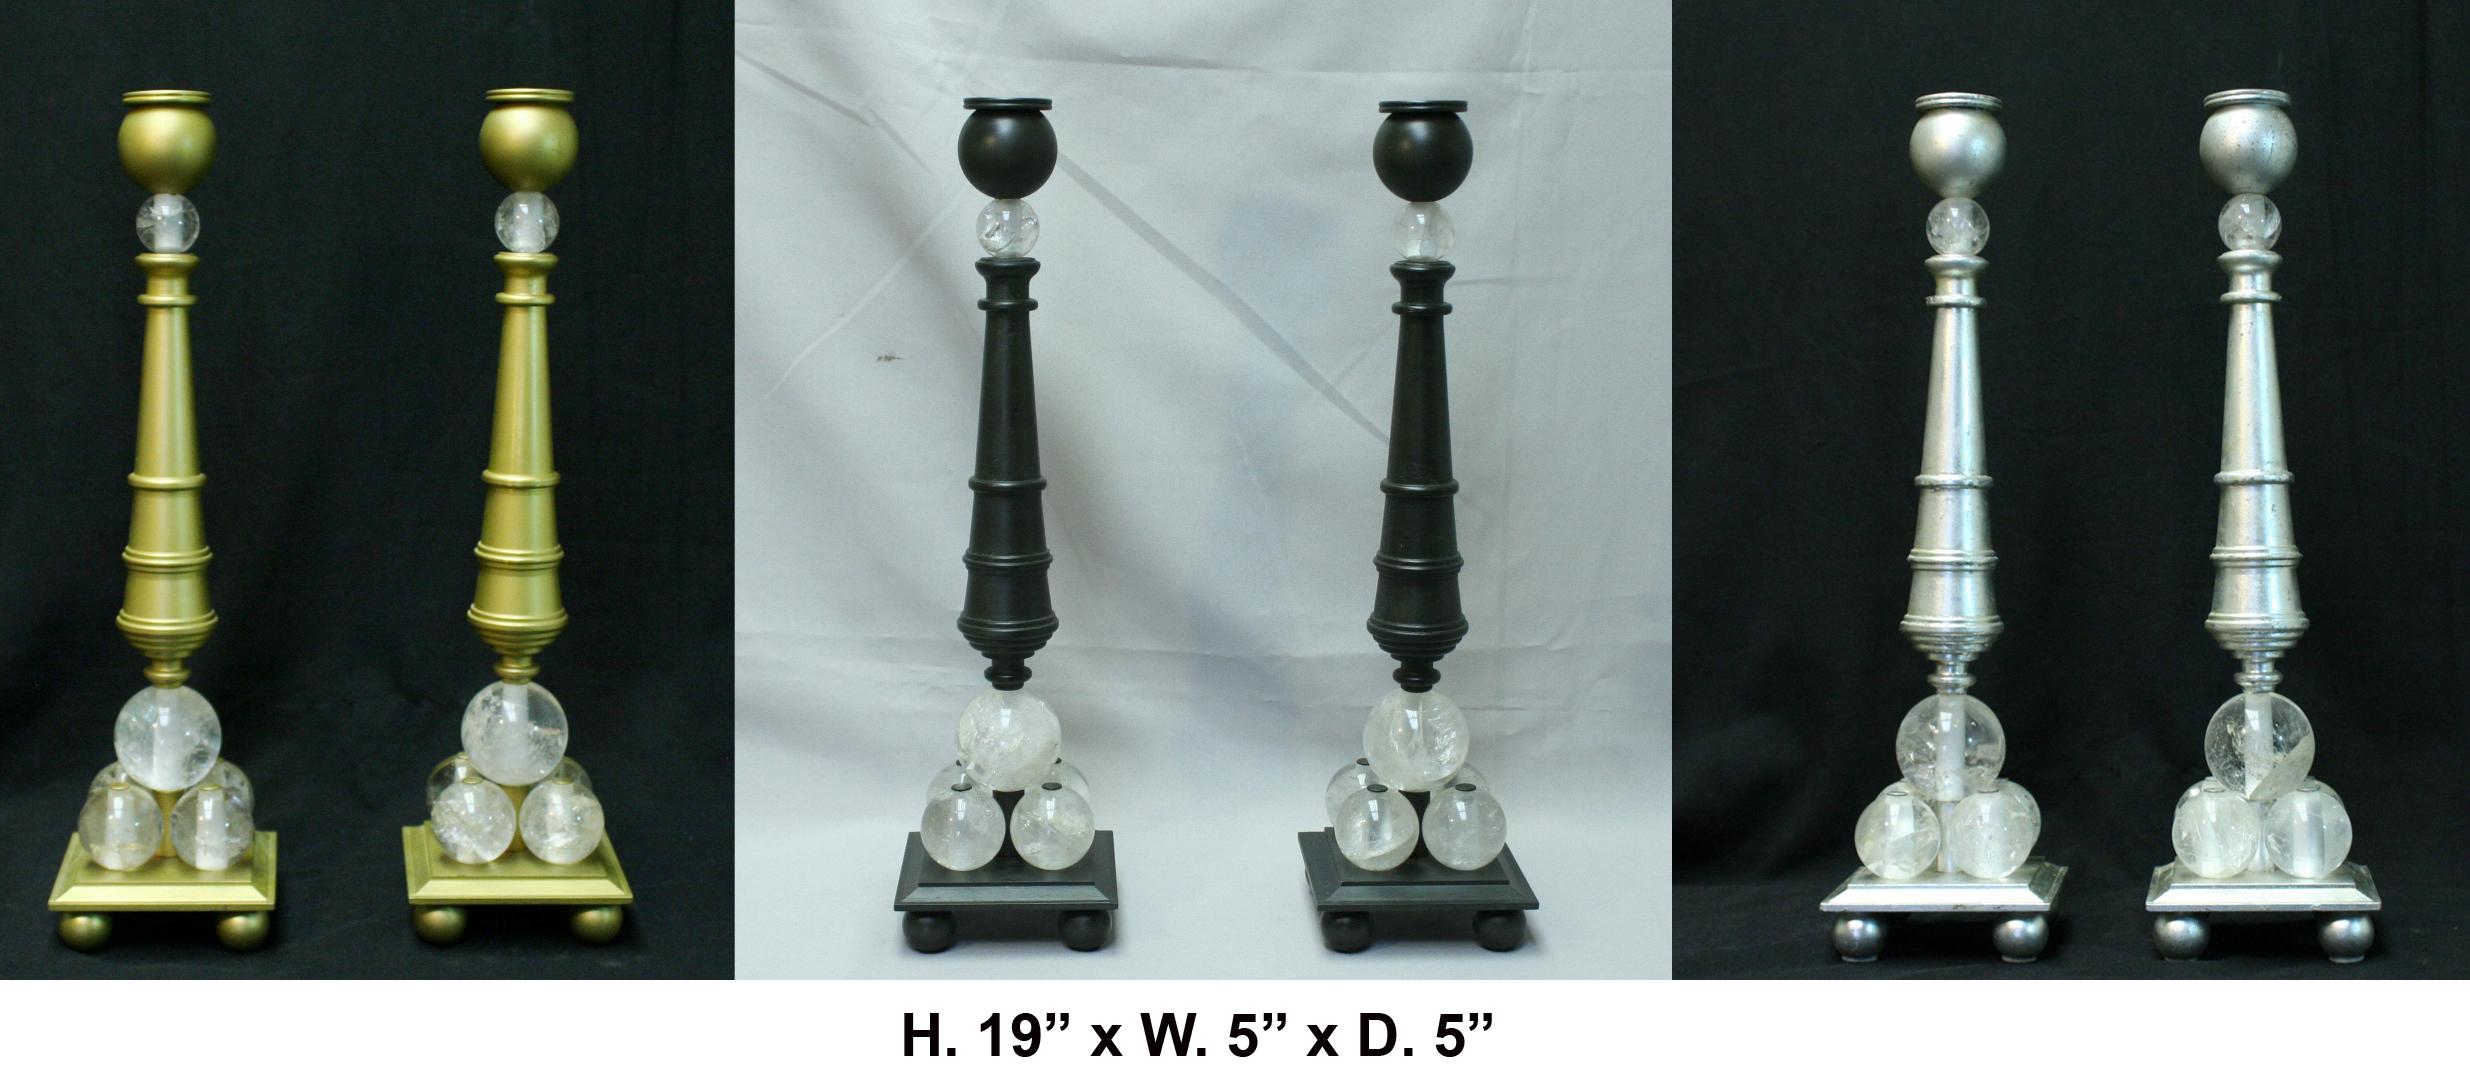 Lovely pair of modern style rock crystal bronze candlesticks. Black finish.
A black bulbous candleholder is over a tapered turned shaft, supported by five hand carved and hand polished Rock Crystal balls, all raised on stepped base with four bronze